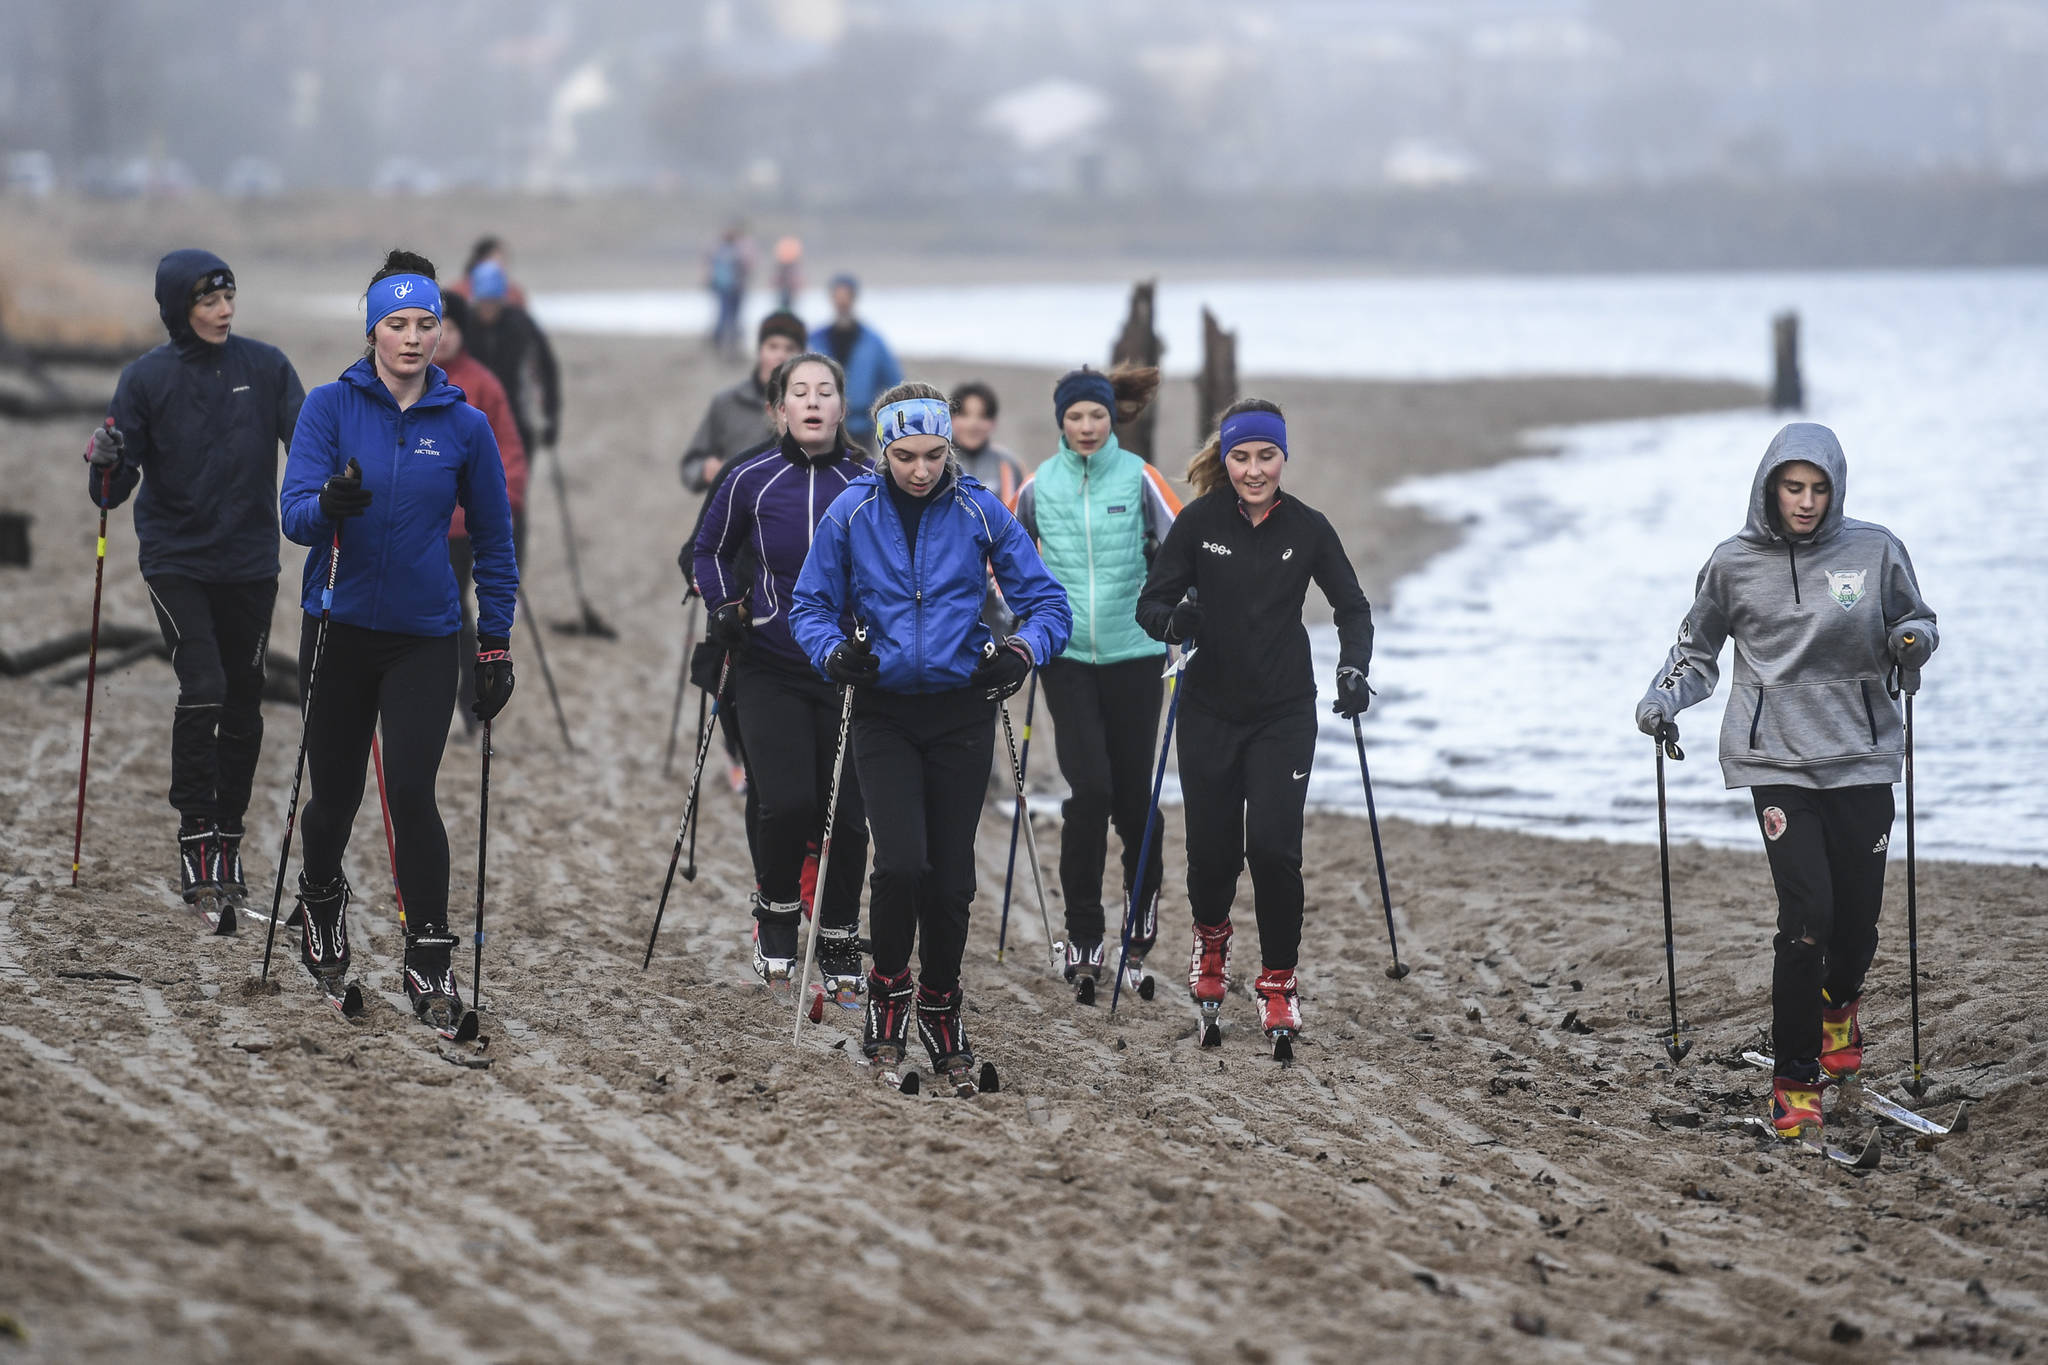 Members of the Juneau Nordic Ski Team practice at Sandy Beach on Friday, Nov. 8, 2019. The team, made up of middle and high school students, is finding alternative ways of training without snow as they prepare for their upcoming season. (Michael Penn | Juneau Empire)